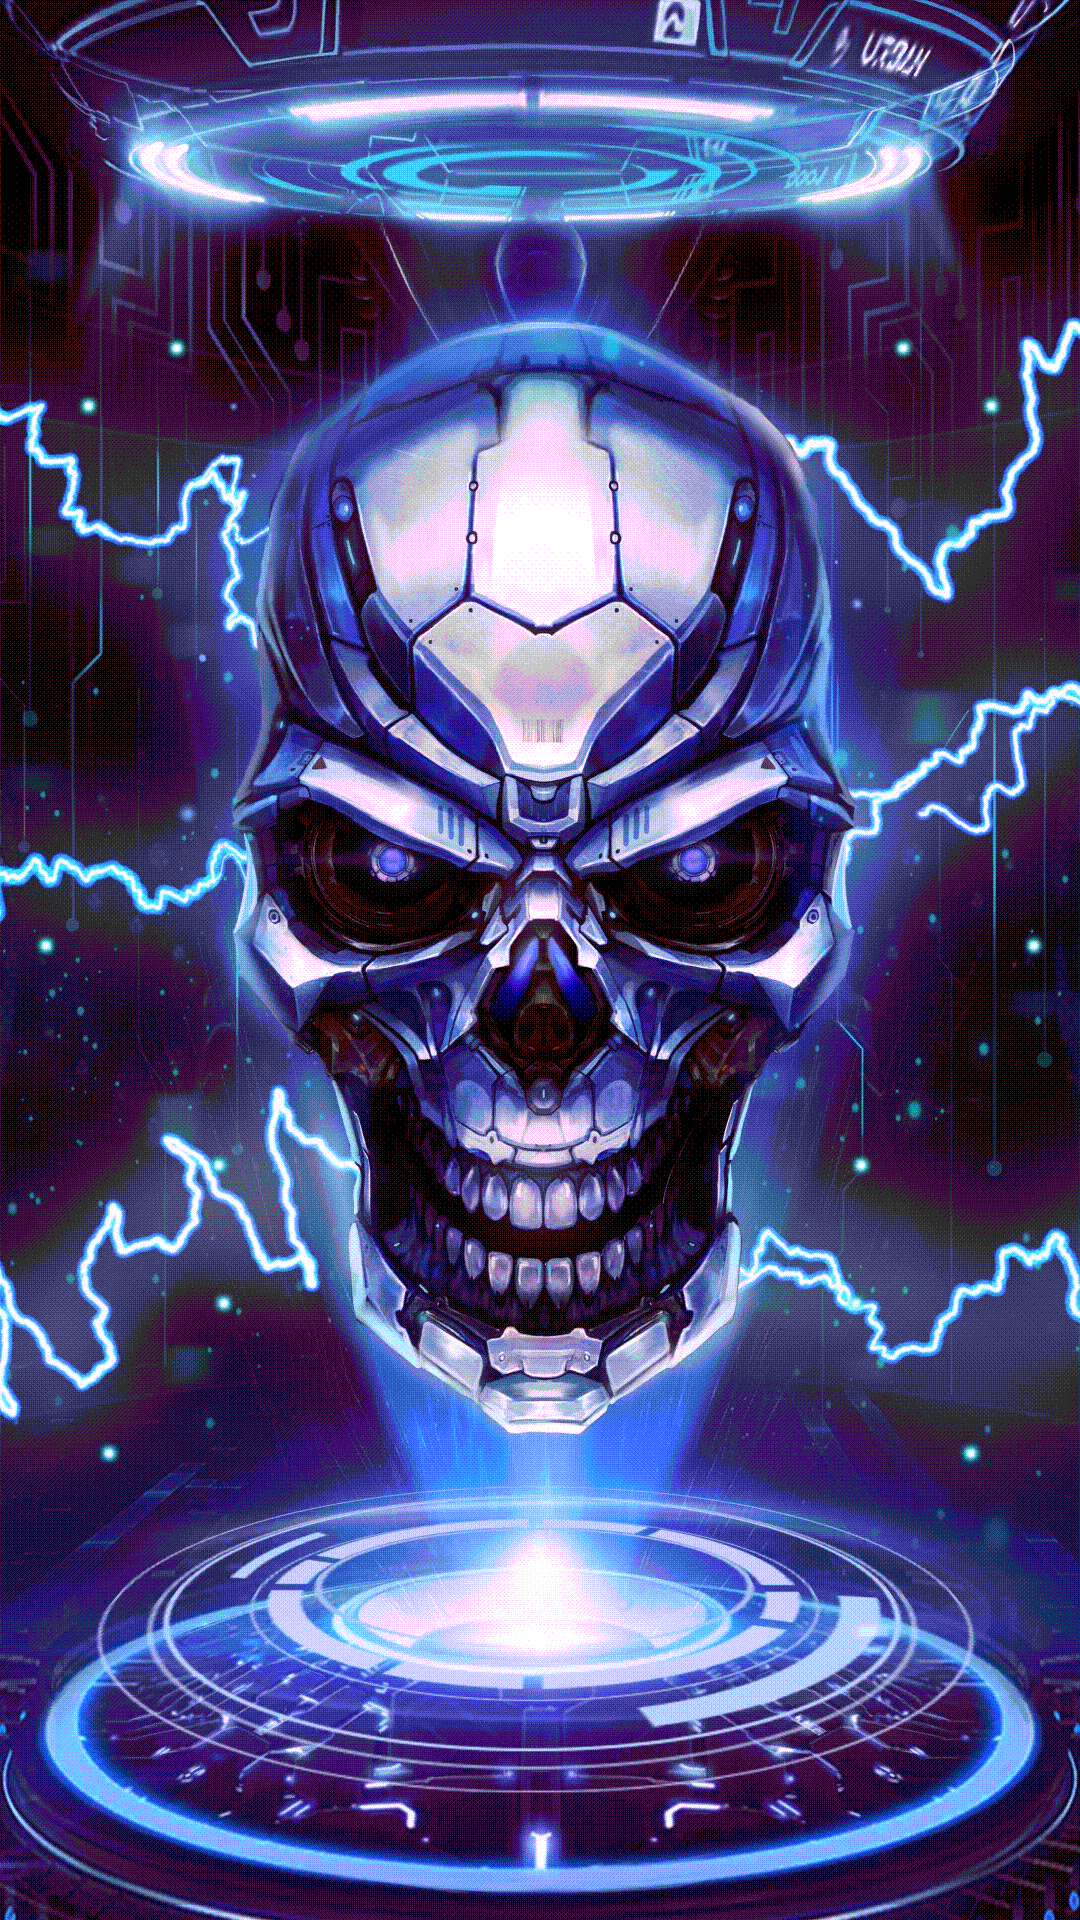 Free Download New Cool Skull Live Wallpaper Android Live Wallpapers From 1080x1920 For Your Desktop Mobile Tablet Explore 30 Live Skeleton Wallpaper Live Skeleton Wallpaper Skeleton Wallpaper Skeleton Wallpapers